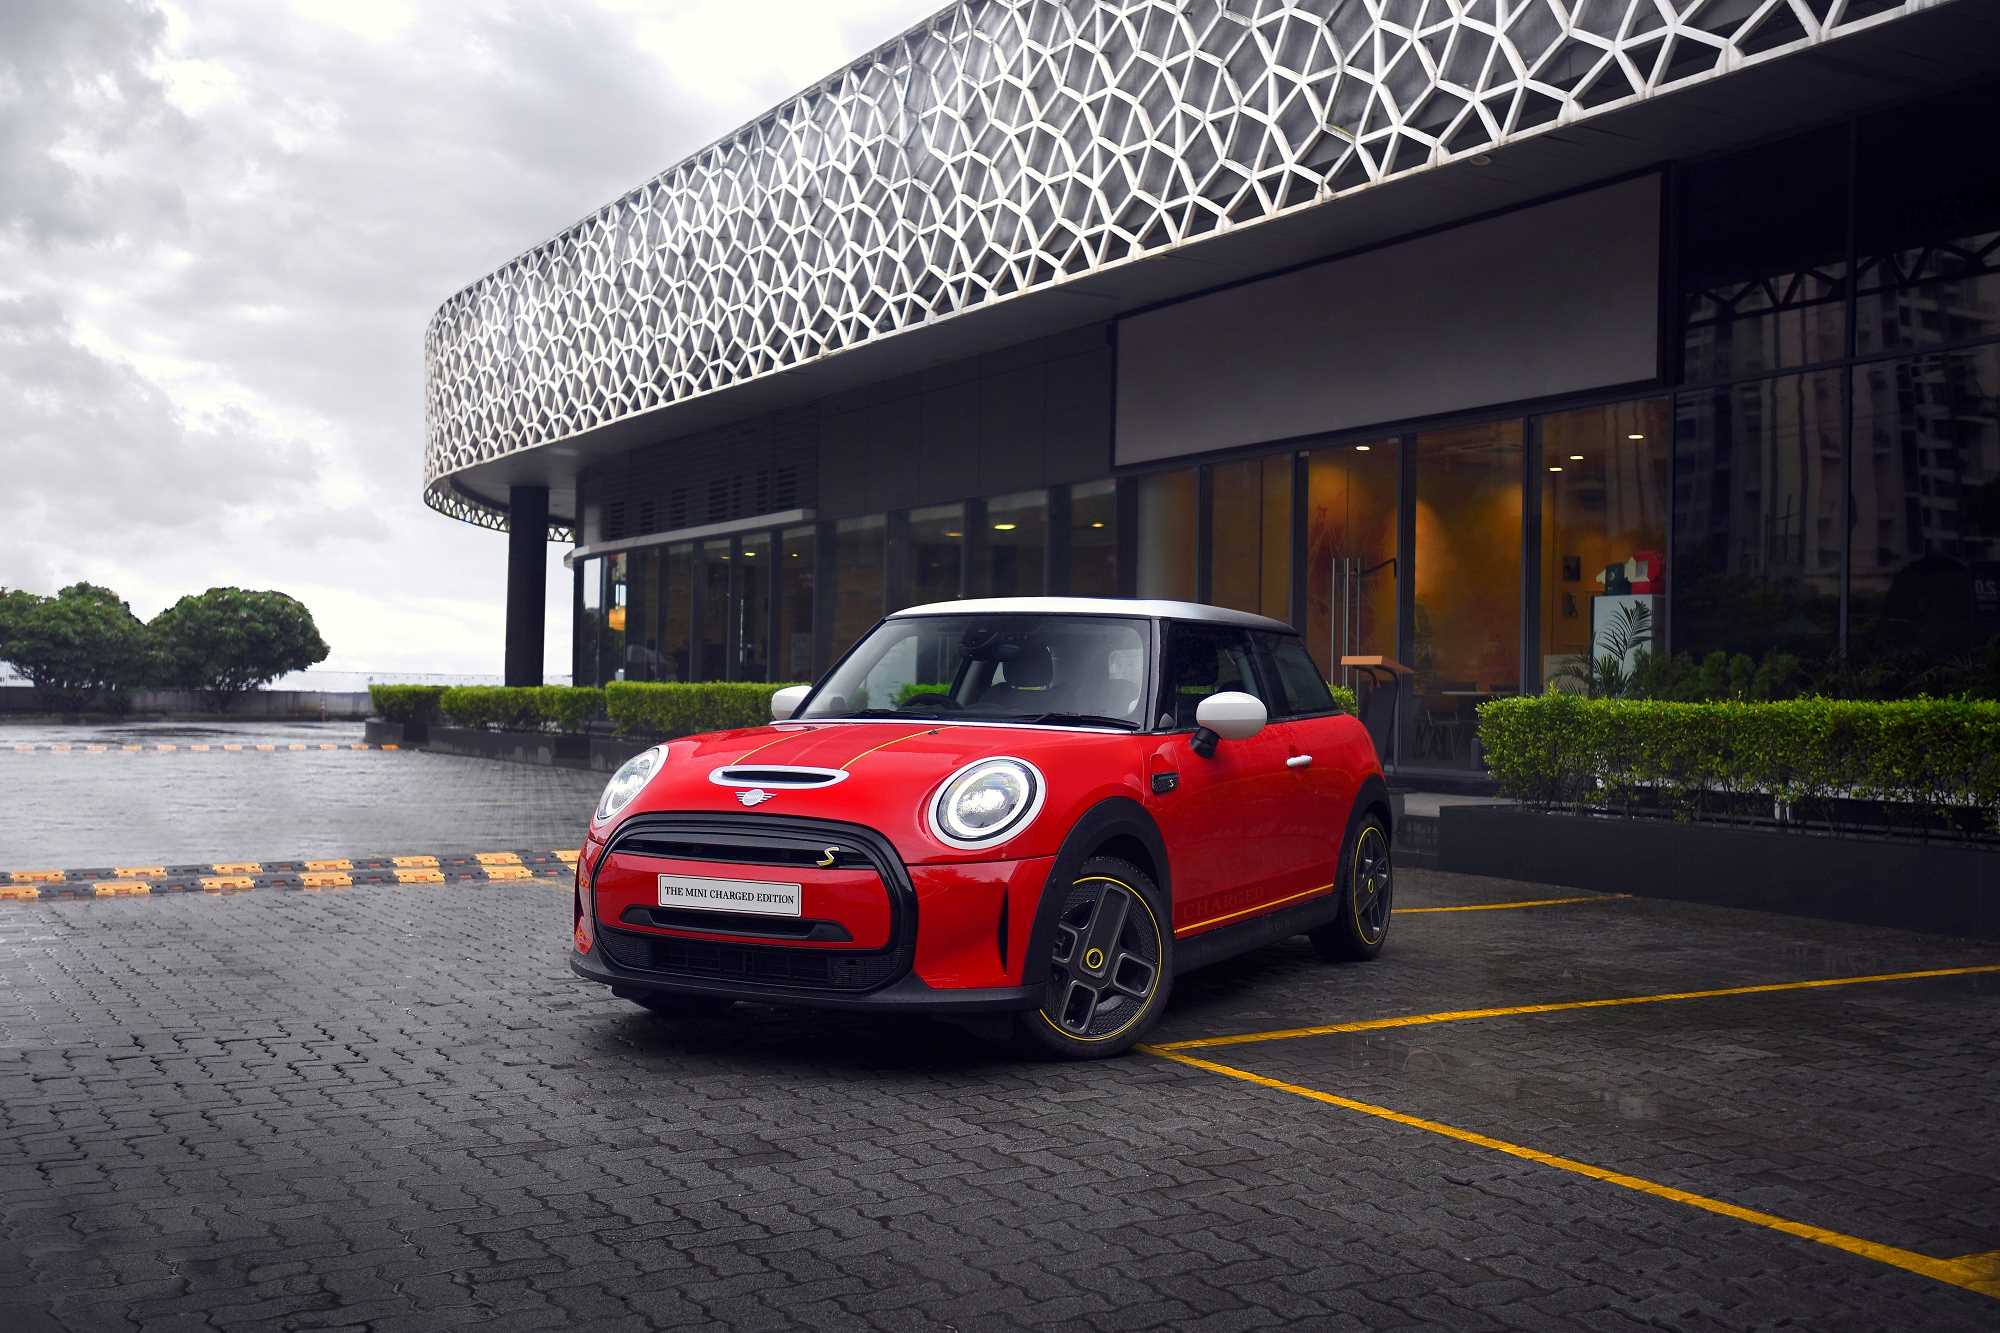 The MINI Charged Edition launched in India